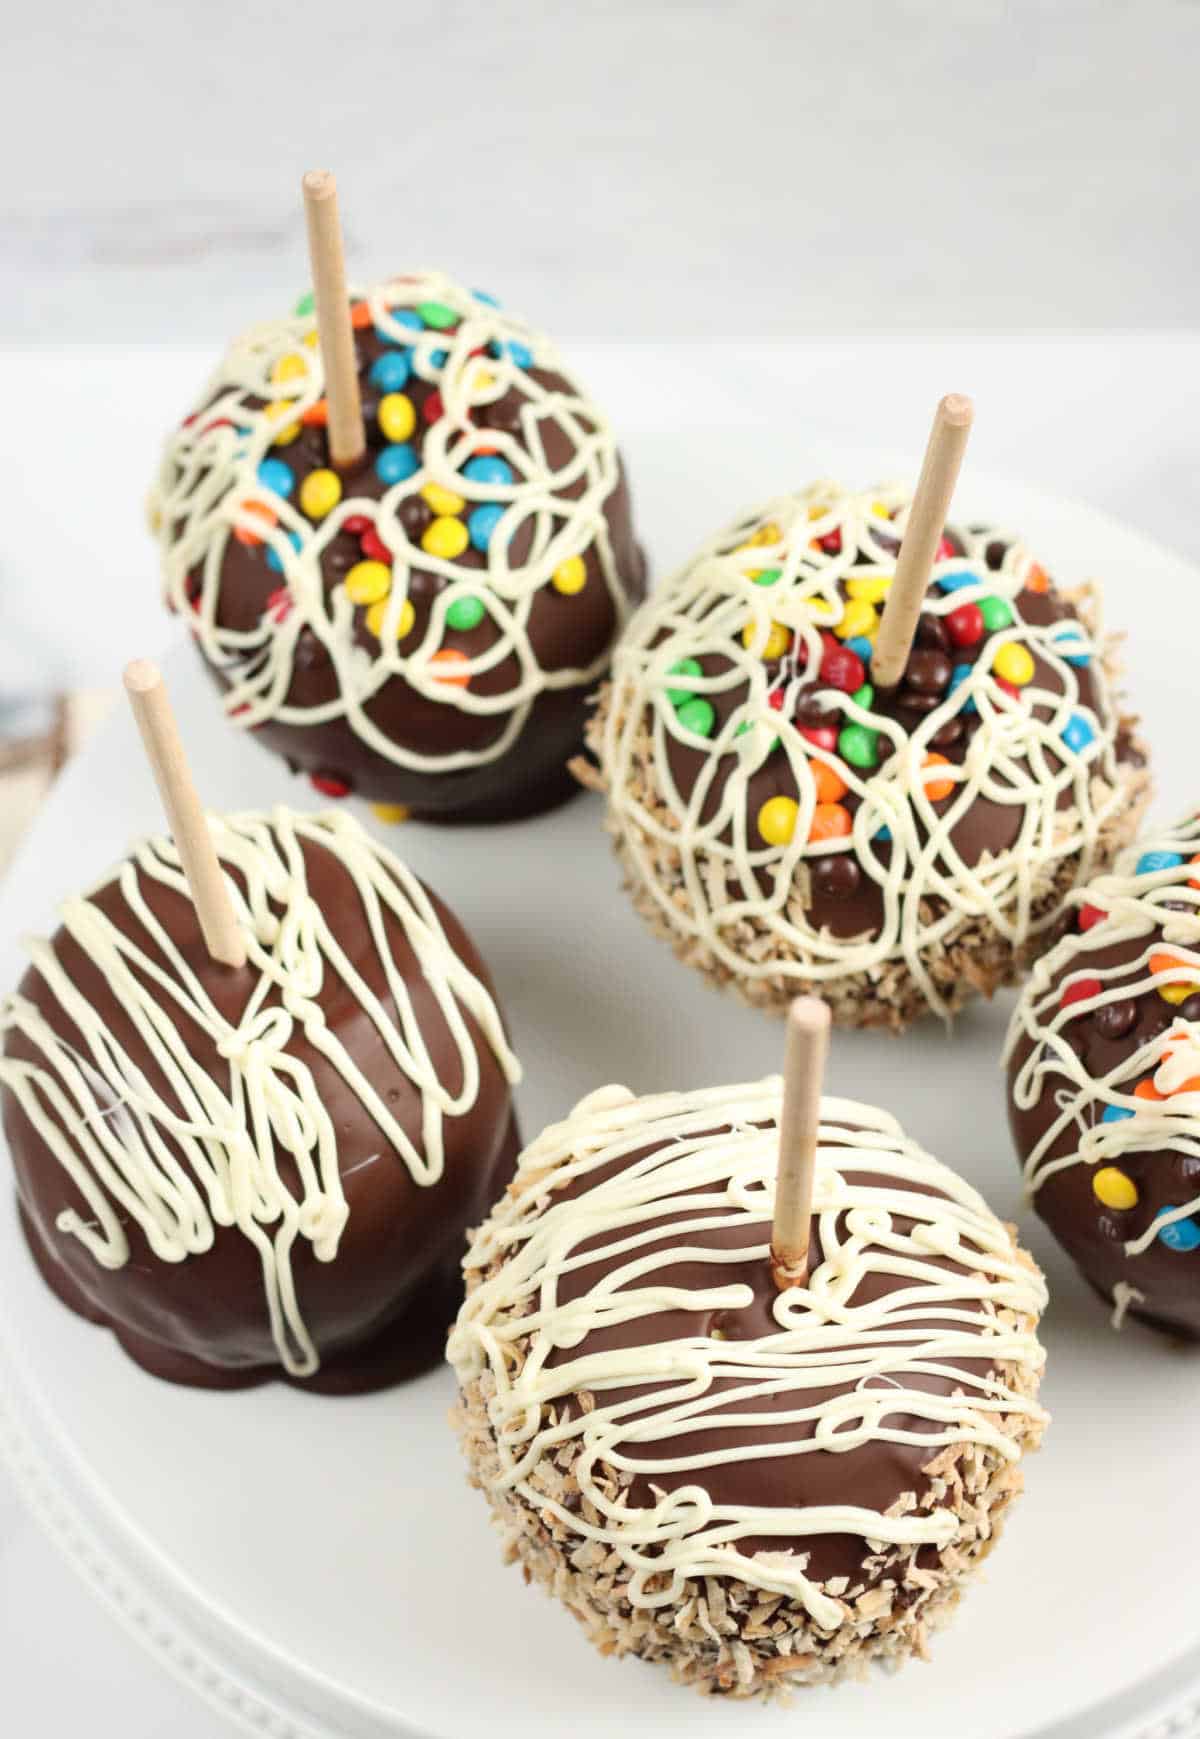 Caramel apples on white footed cake dish with chocolate and candies.